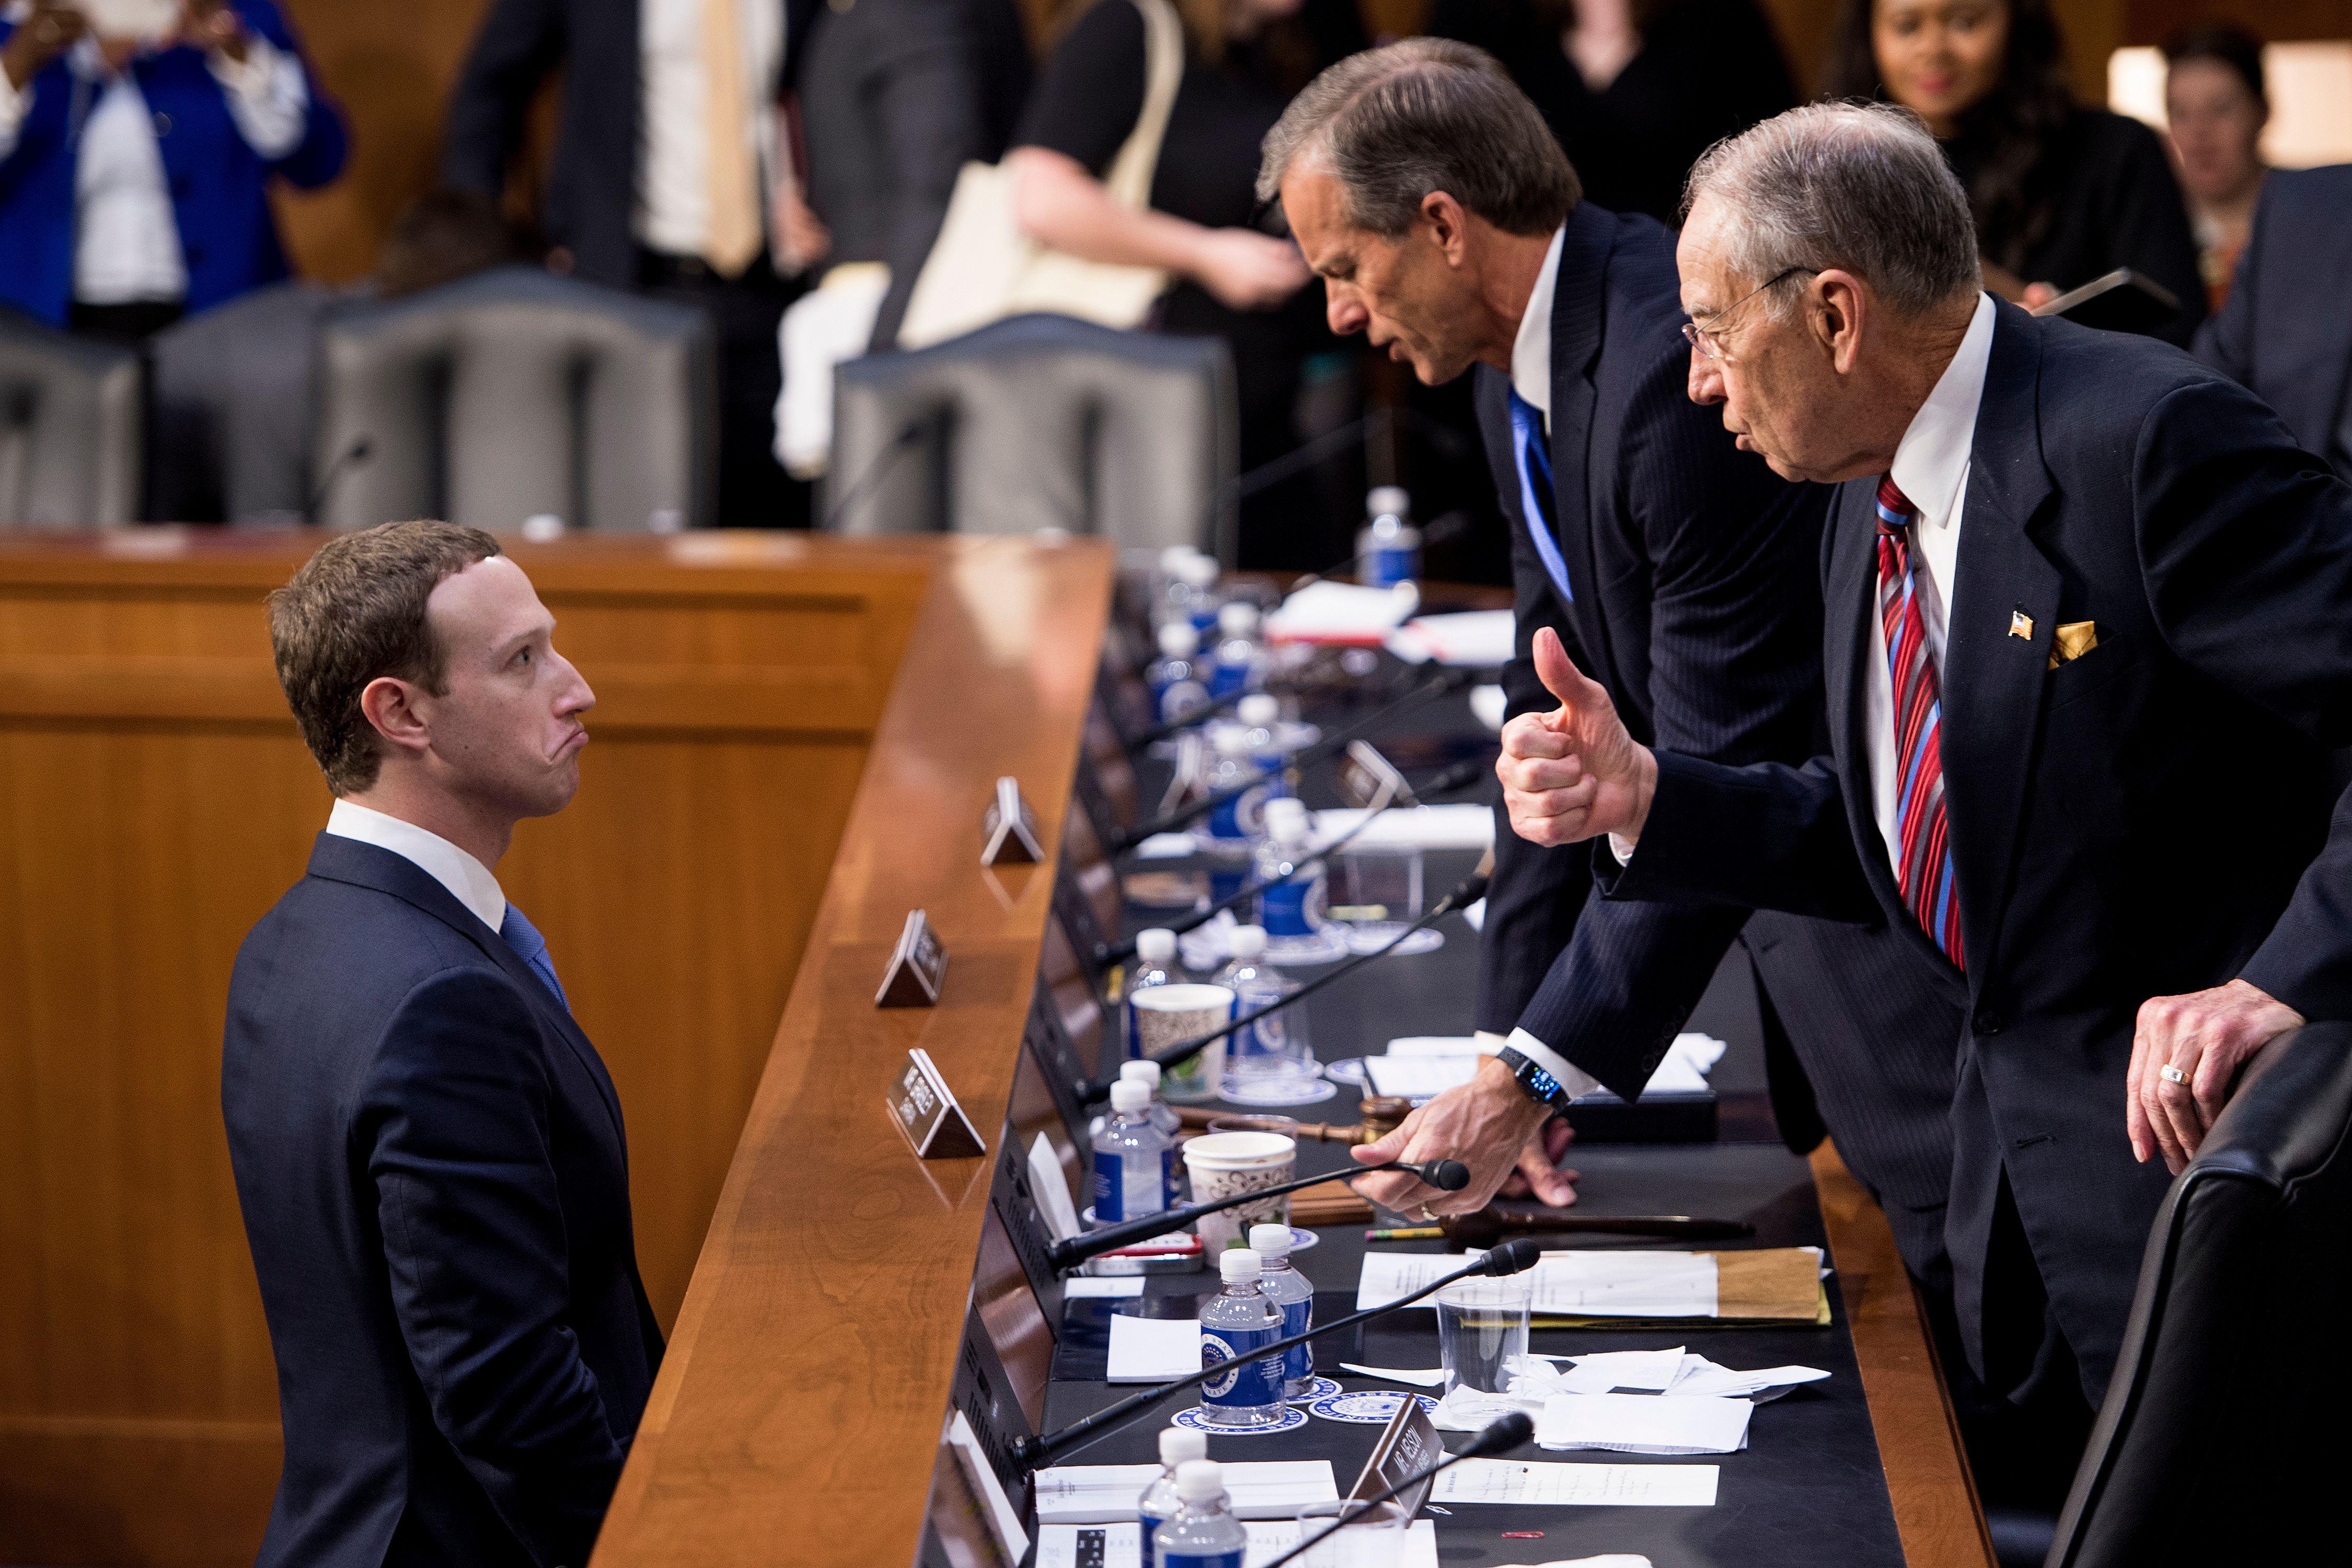 Facebook CEO Mark Zuckerberg (L) speaks with Senator John Thune (C), R-SD, and Senator Chuck Grassley (R), R-IA following a joint hearing of the Senate Commerce, Science and Transportation Committee and Senate Judiciary Committee on Capitol Hill April 10, 2018 in Washington, DC.
Facebook chief Mark Zuckerberg took personal responsibility Tuesday for the leak of data on tens of millions of its users, while warning of an 'arms race' against Russian disinformation during a high stakes face-to-face with US lawmakers. / AFP PHOTO / Brendan Smialowski        (Photo credit should read BRENDAN SMIALOWSKI/AFP/Getty Images)